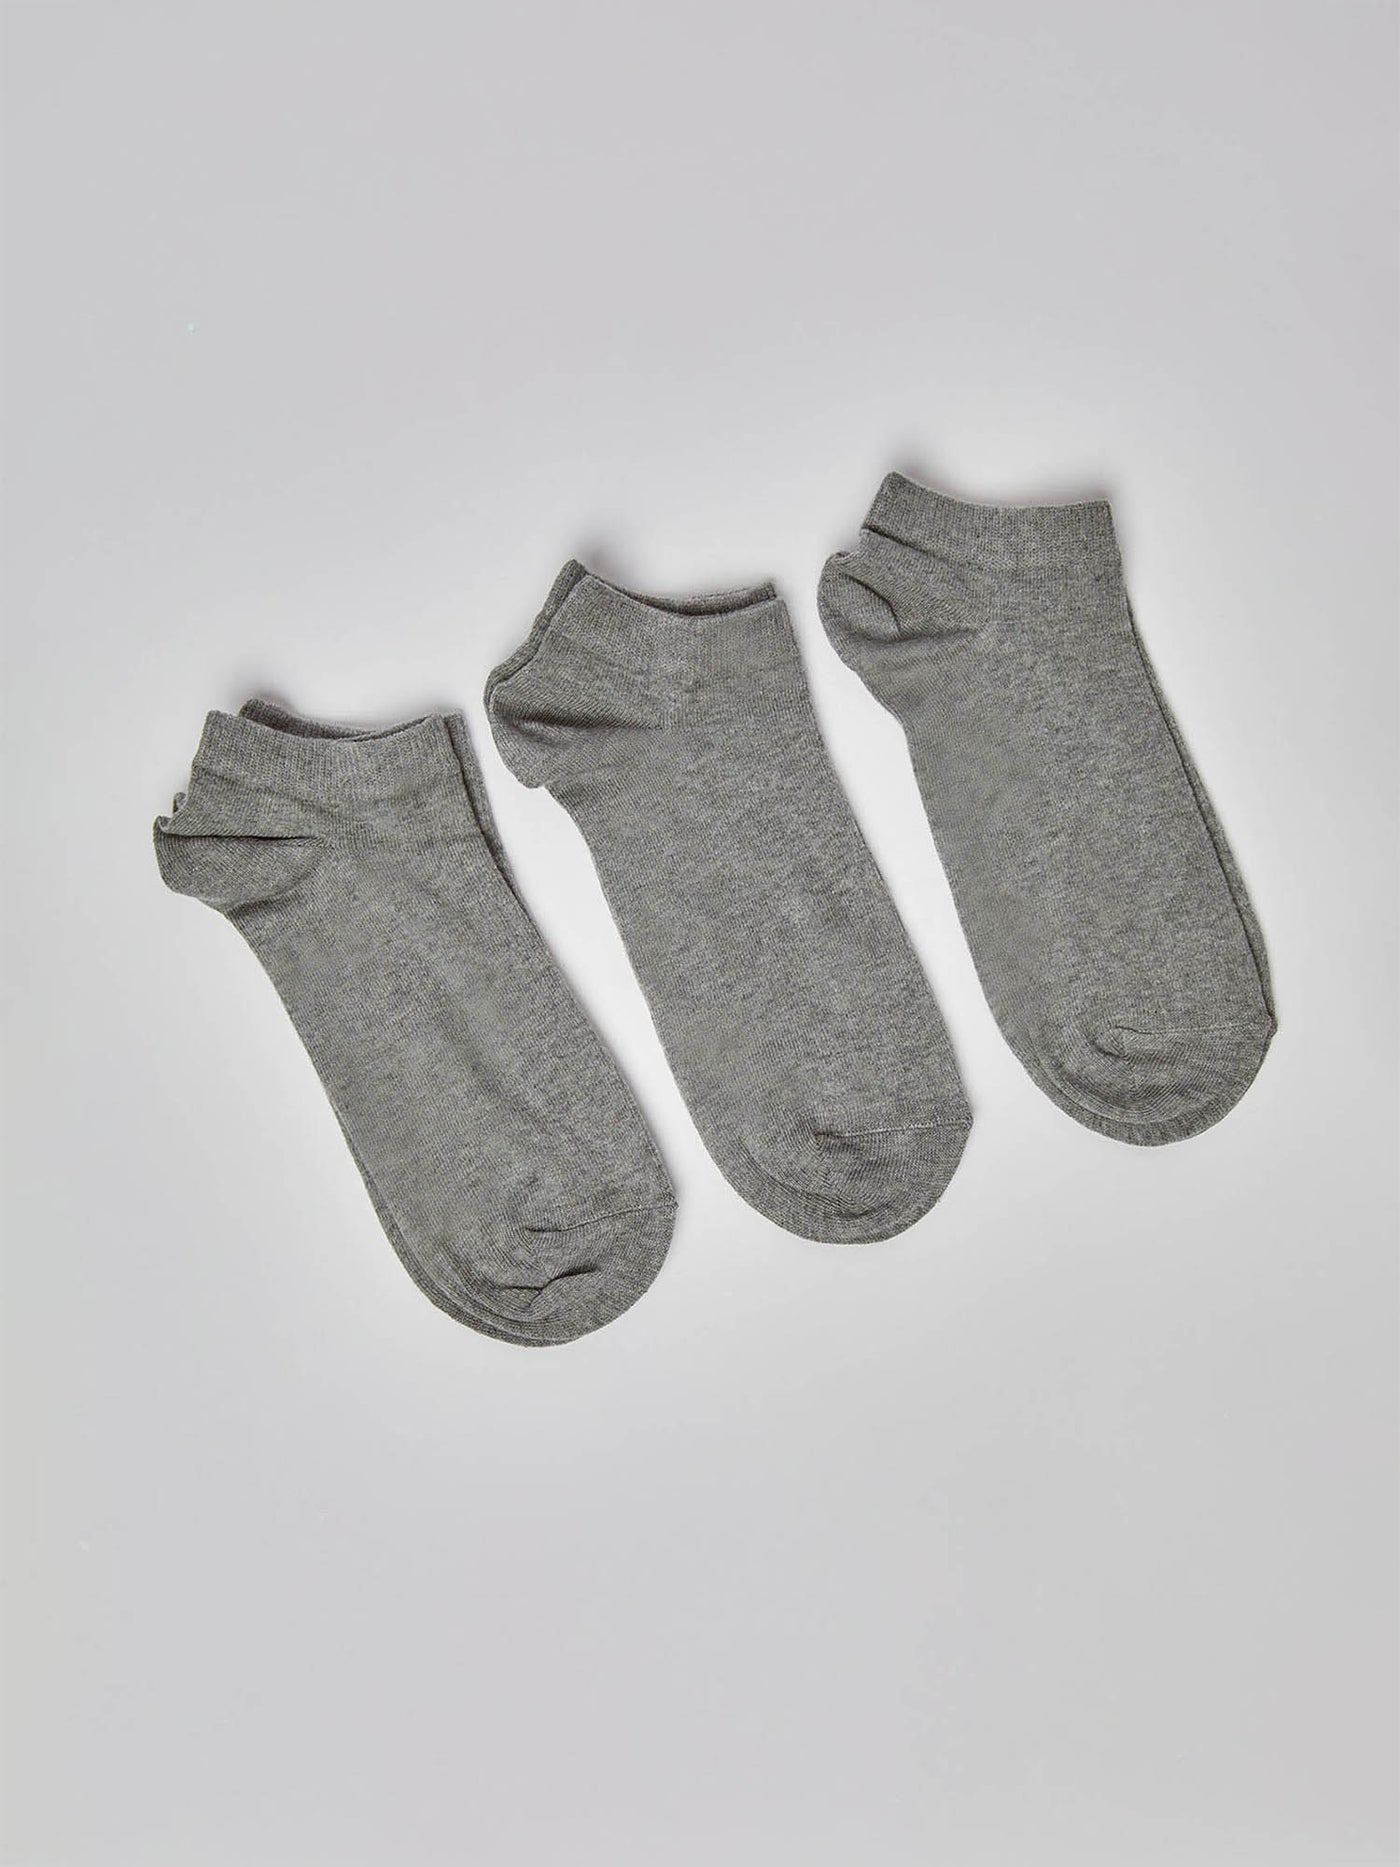 3 Pairs of Socks - Solid